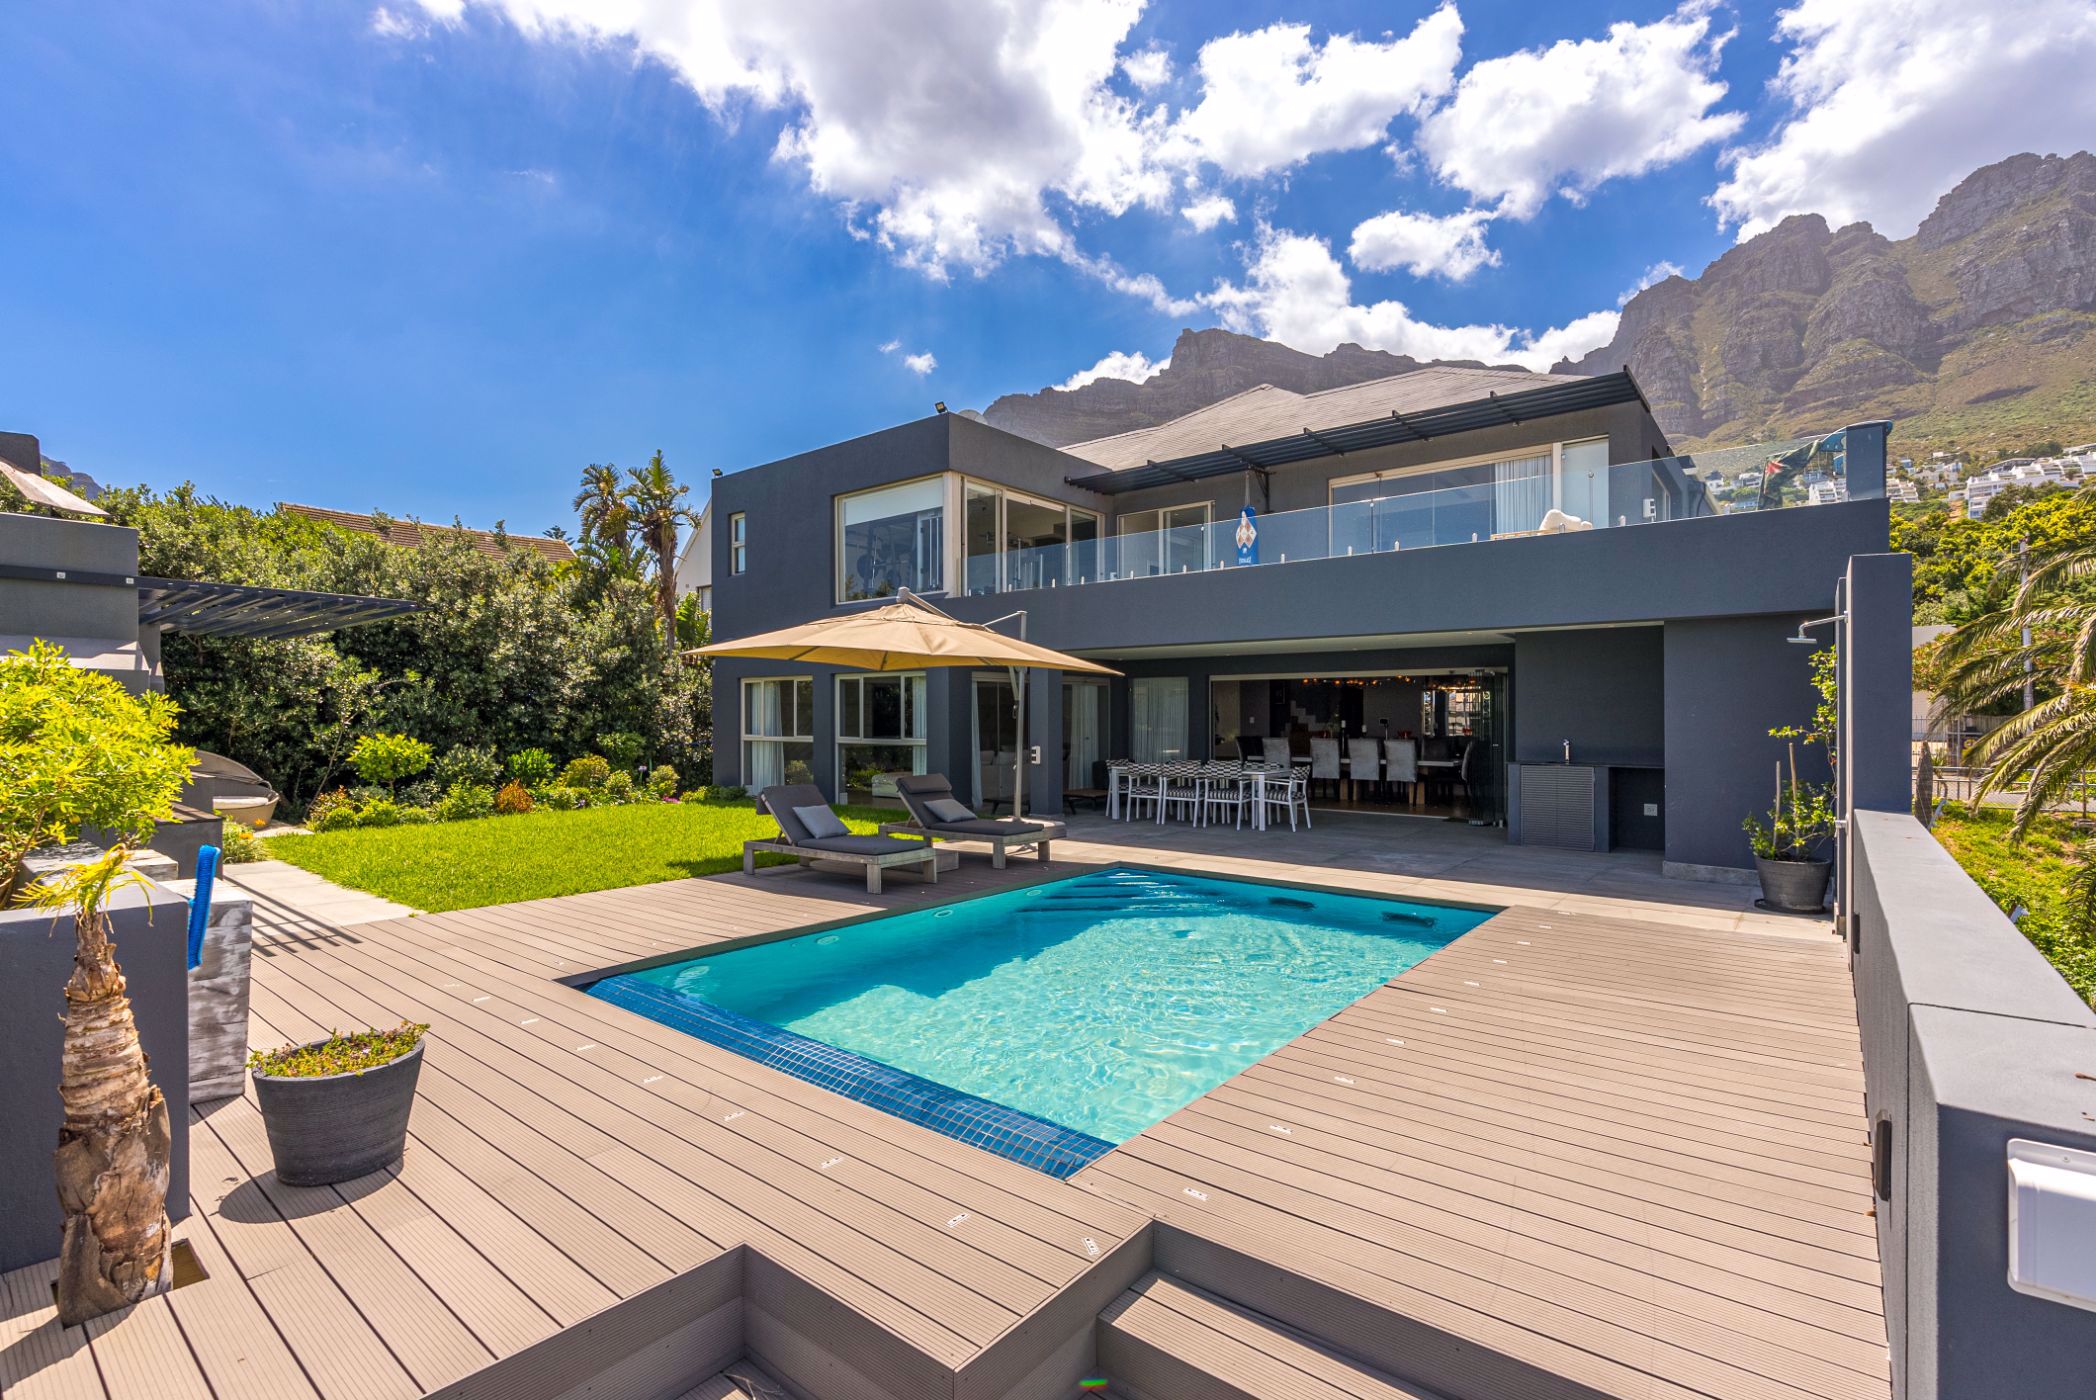 5 bedroom house for sale in Camps Bay